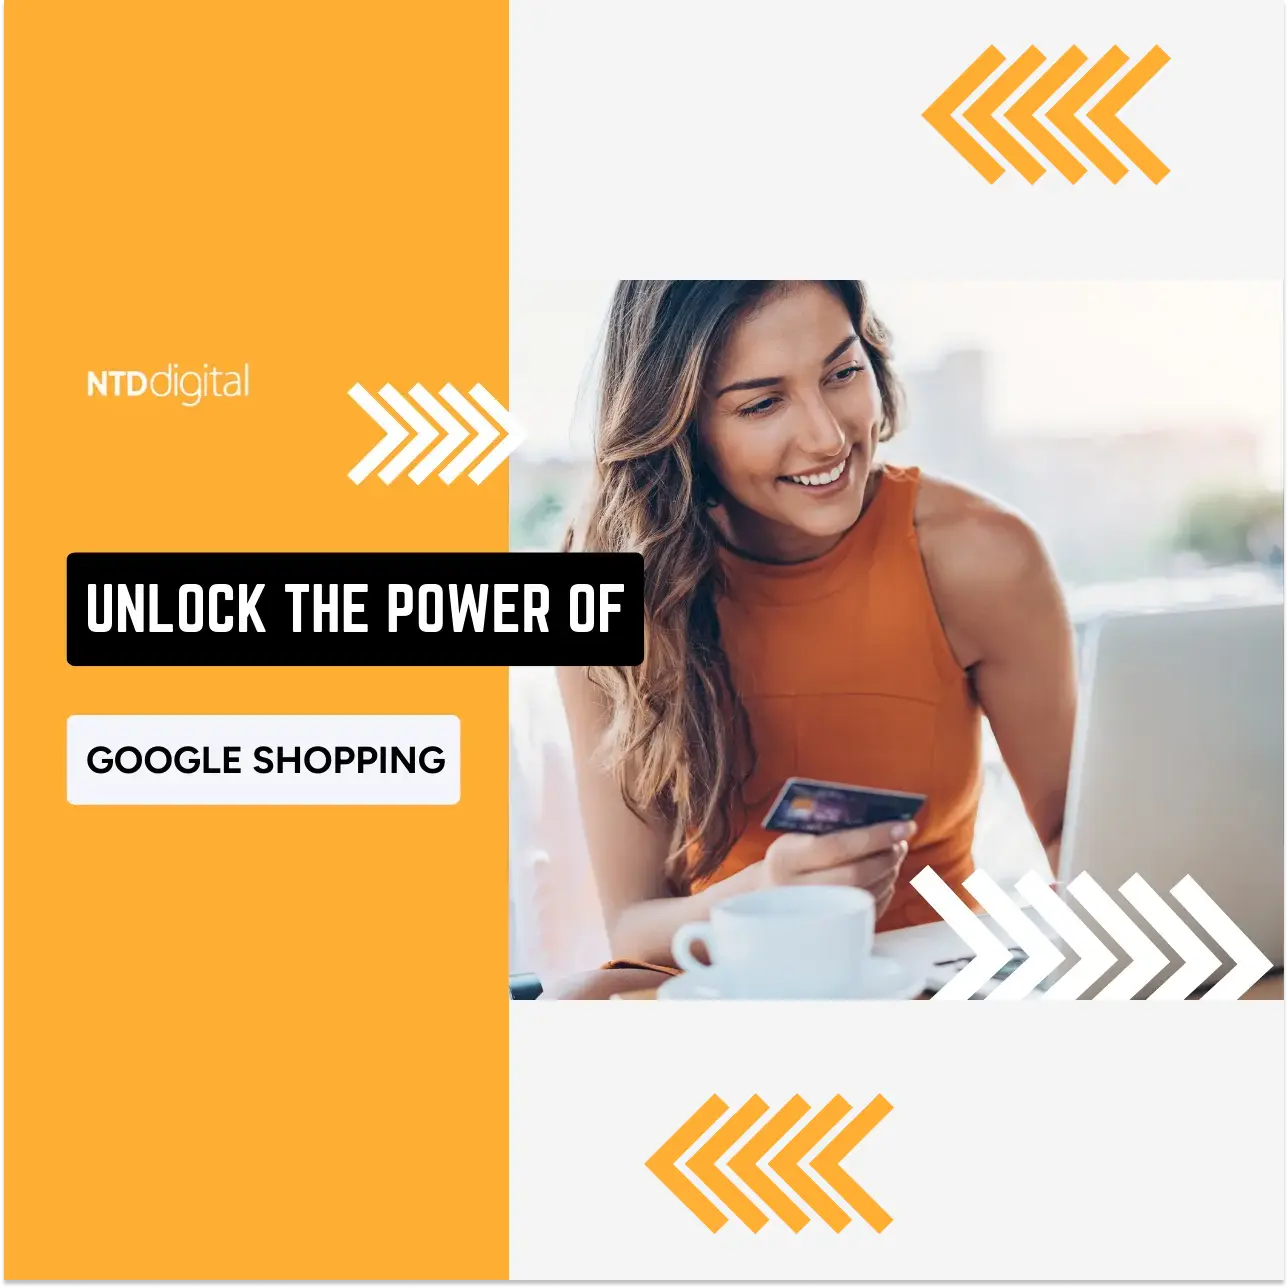 Unlock the Power of Google Shopping: A Retailer’s Roadmap to Winning More Customers